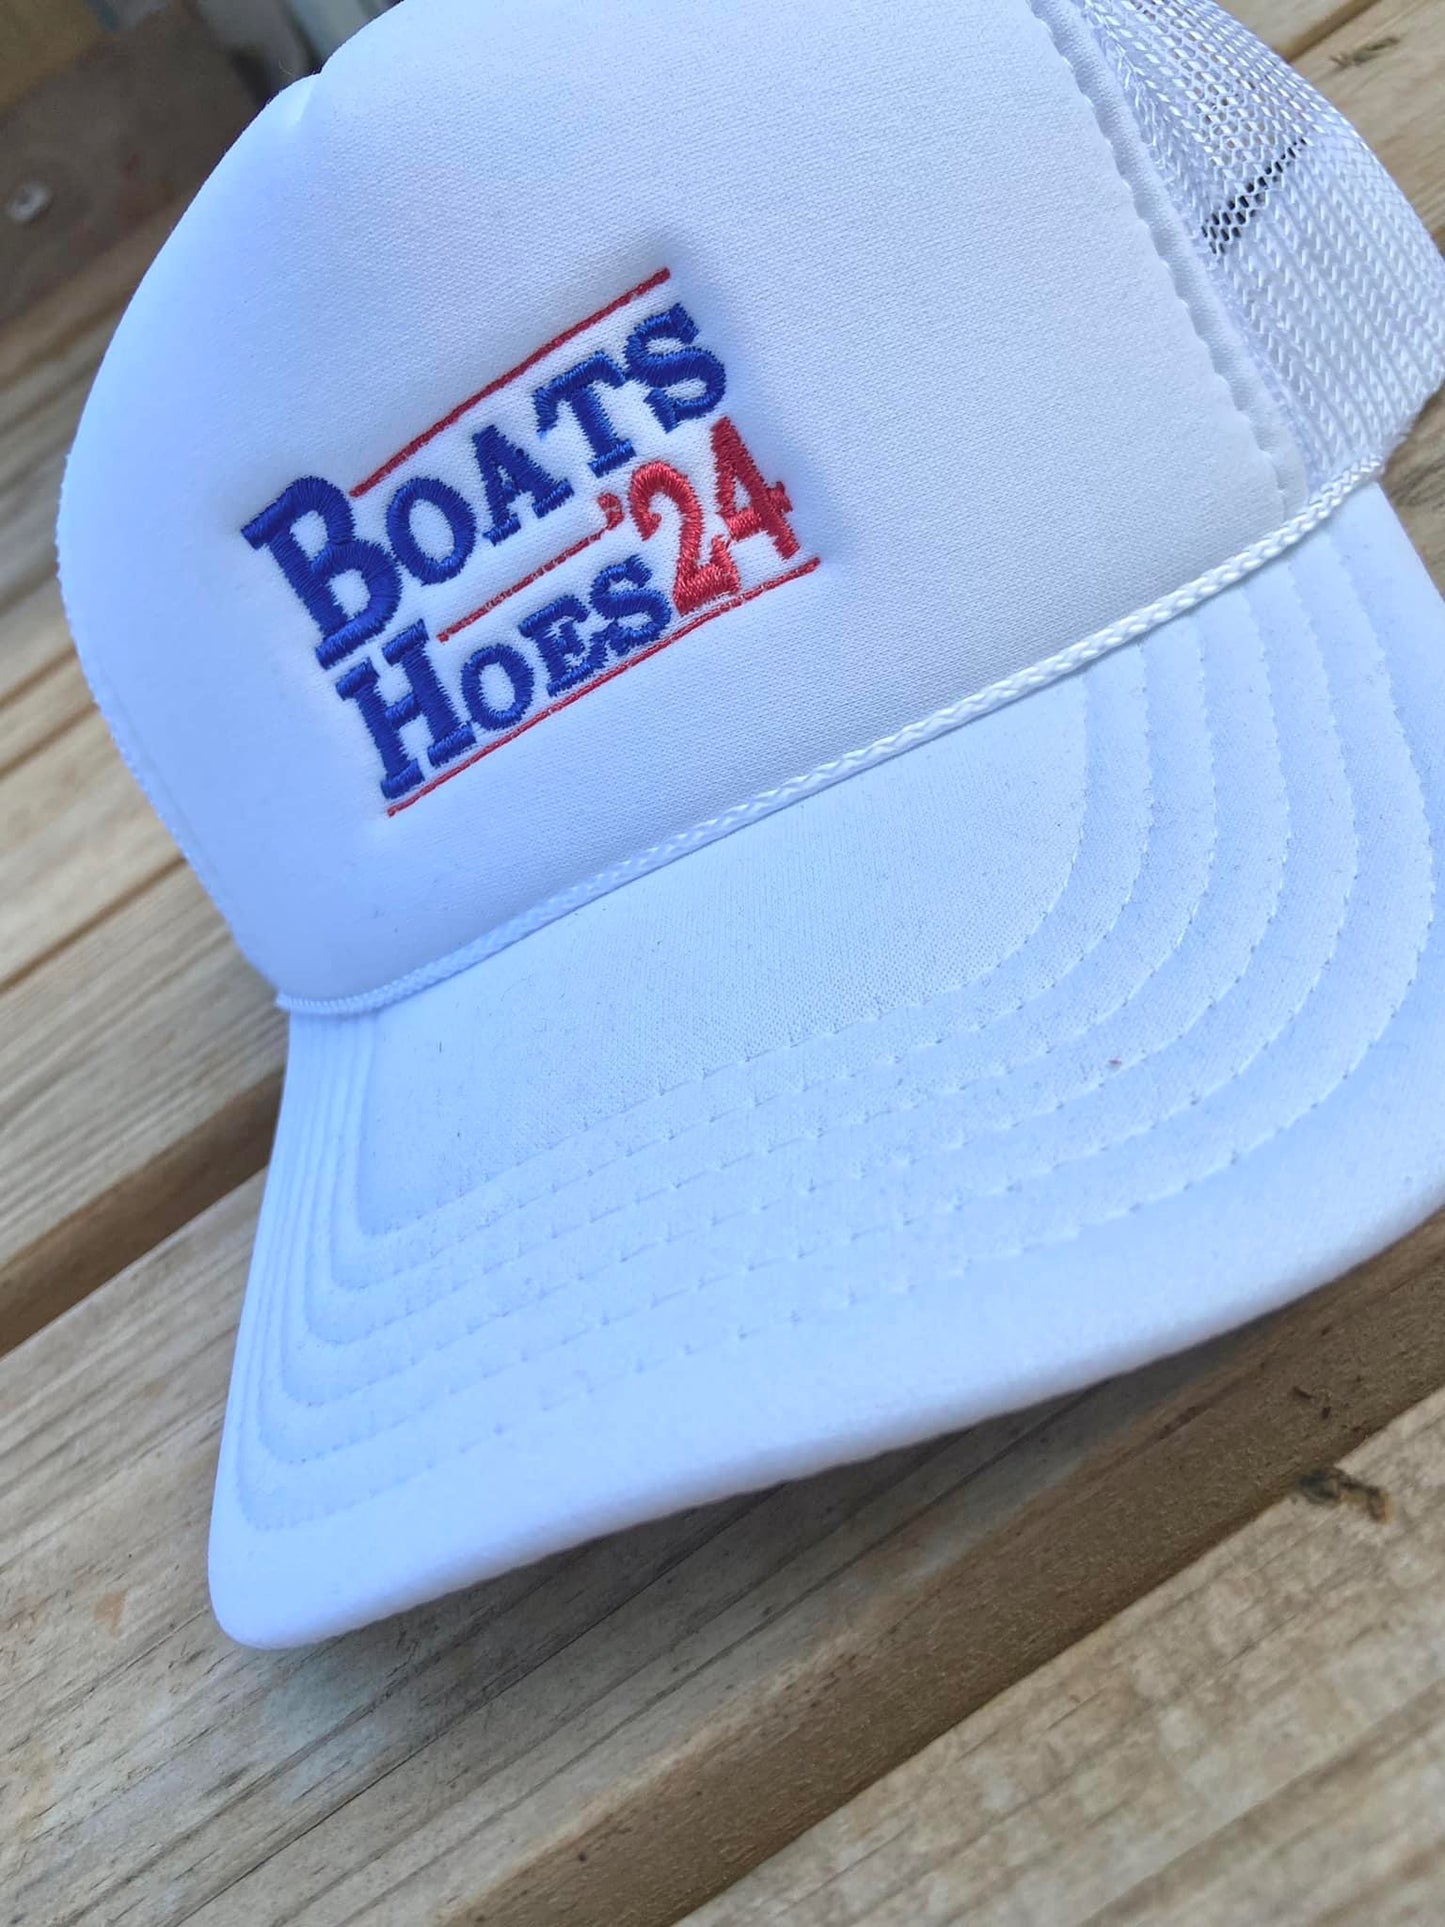 Boats & Hoes ‘24